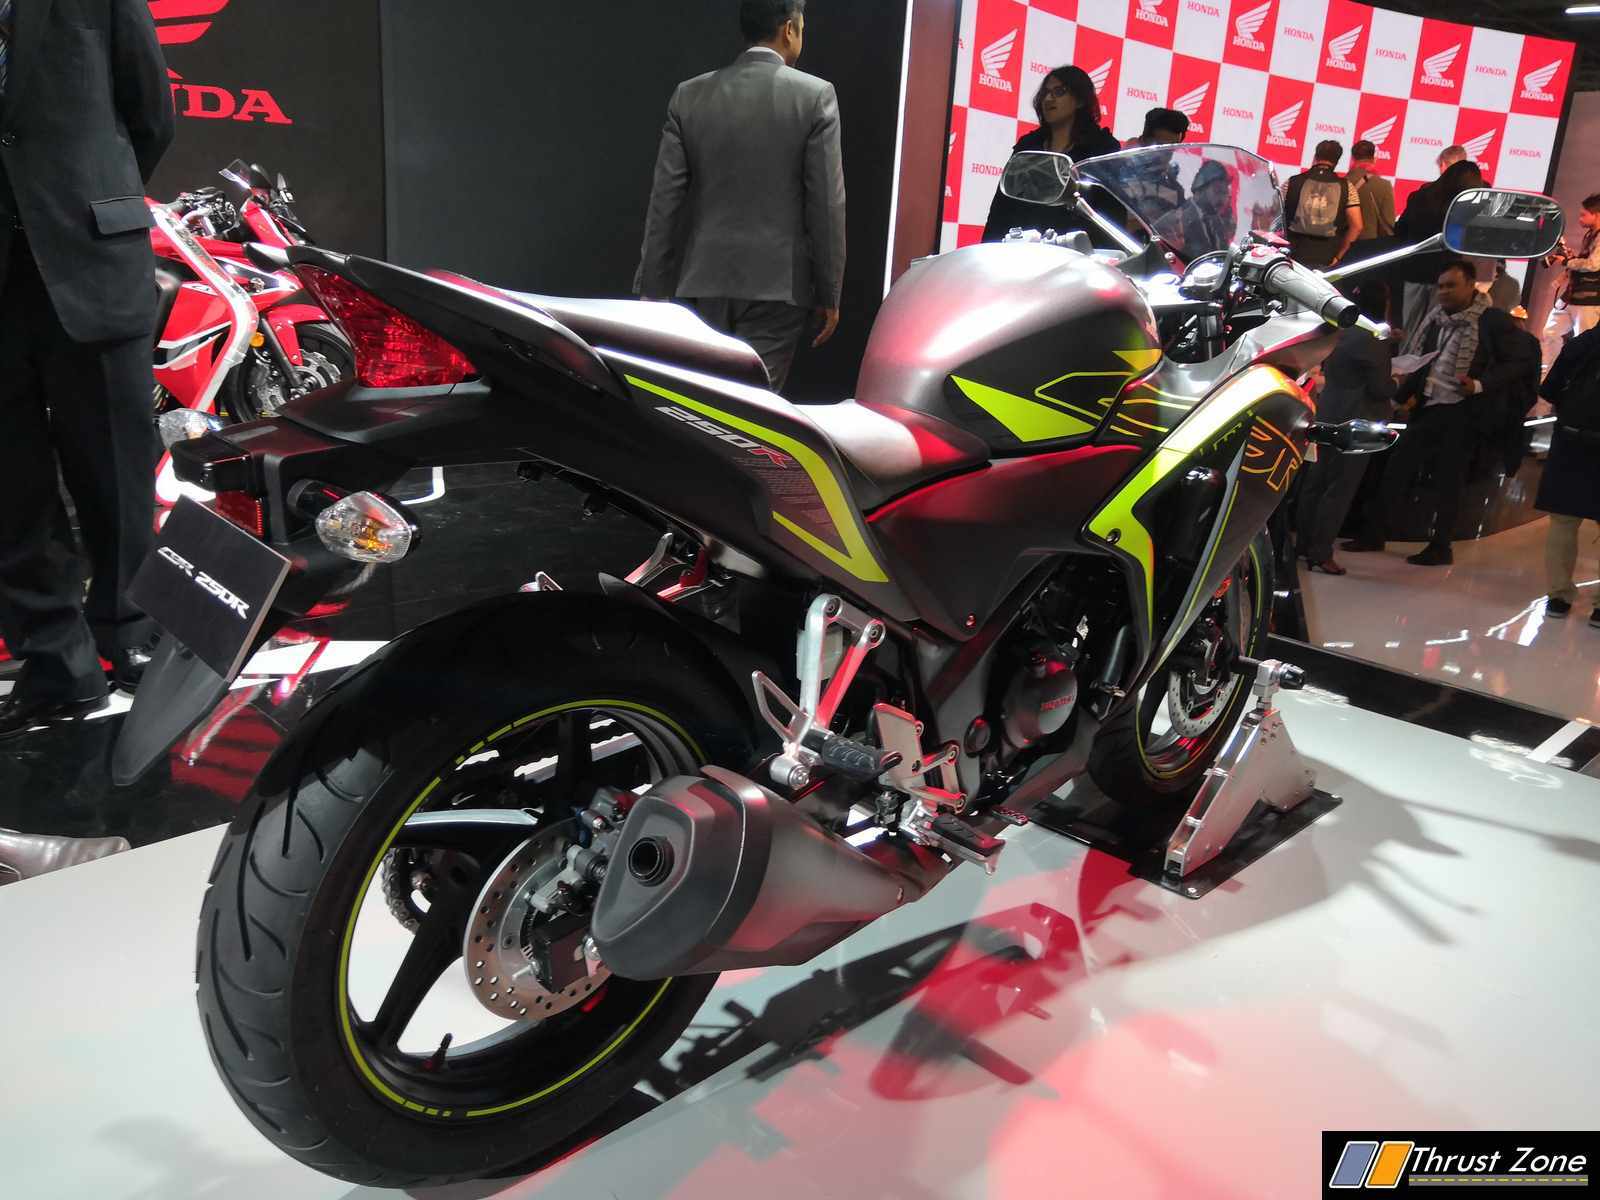 18 Honda Cbr 250r Showcased At The Auto Expo 18 Added Features